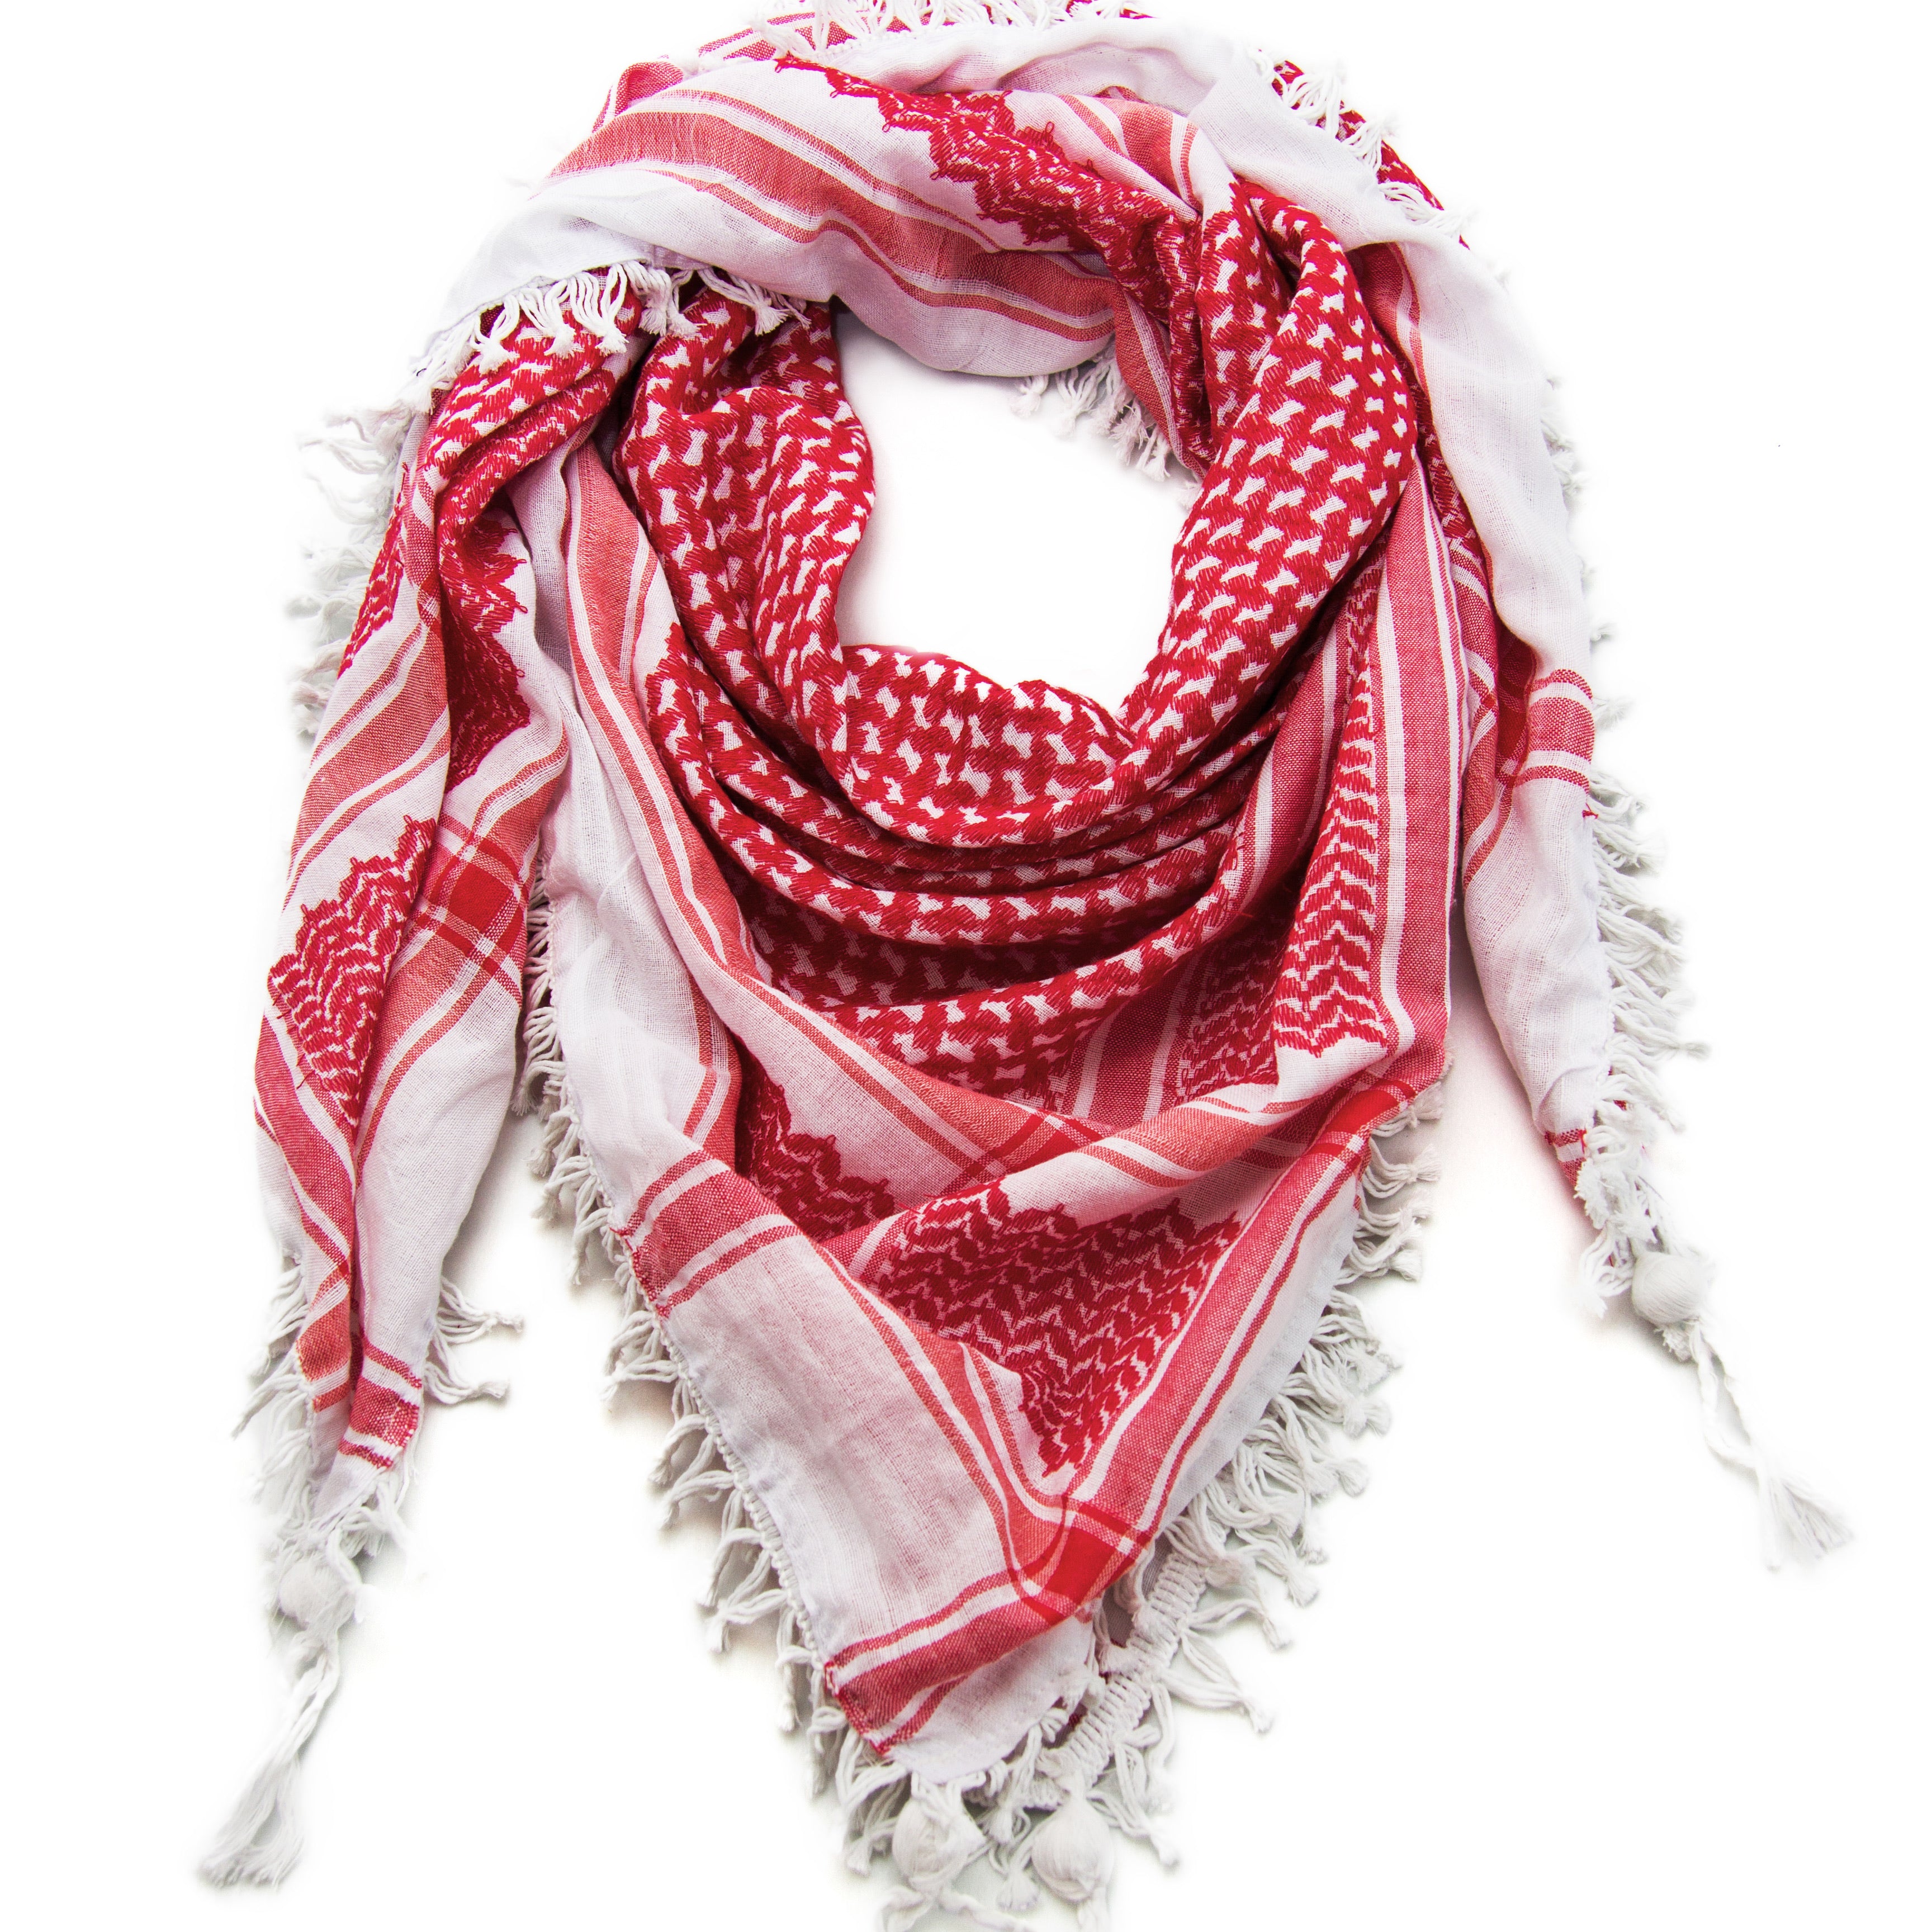 Red and White keffiyeh. Traditional design